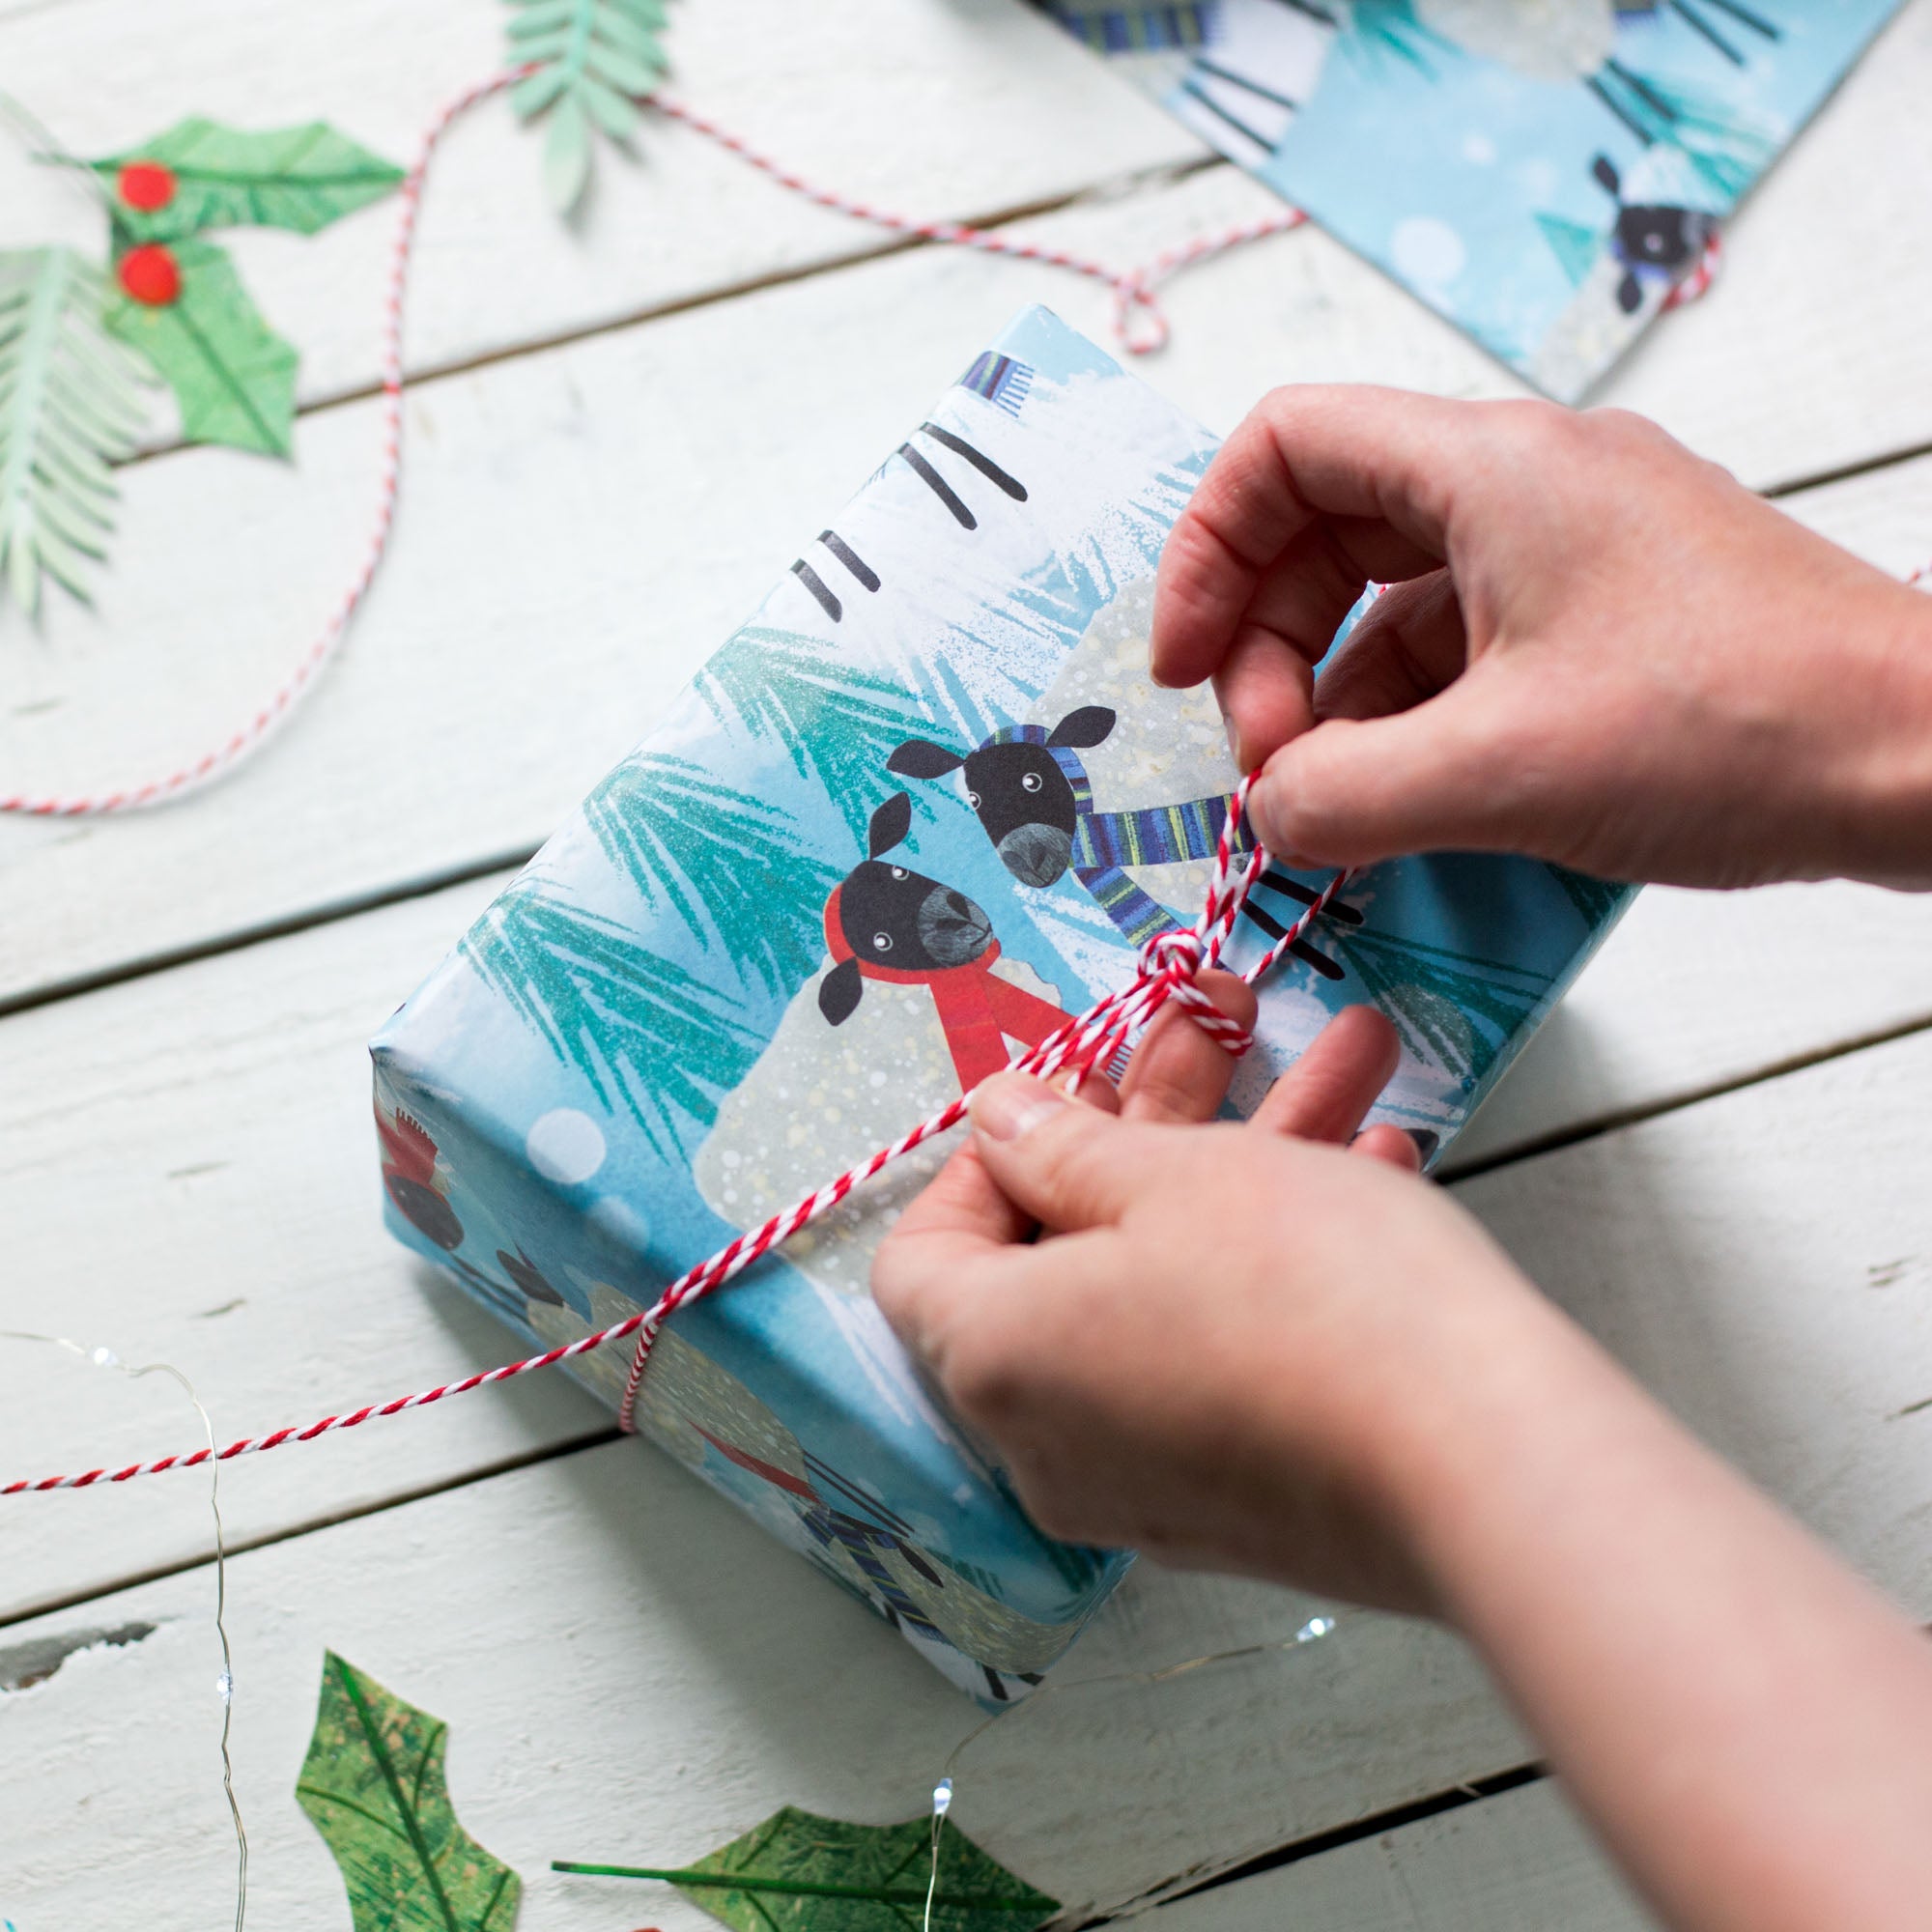 In this image two hands are busy tying a bow with white and red string on top of a parcel wrapped in the winter woolies gift wrap. The gift wrap section visible shows two black-headed sheep facing each other. One wears a red scarf while the other wears a purple toned striped scarf. The background is blue with Christmas trees and snow dispersed between more cheery sheep characters.